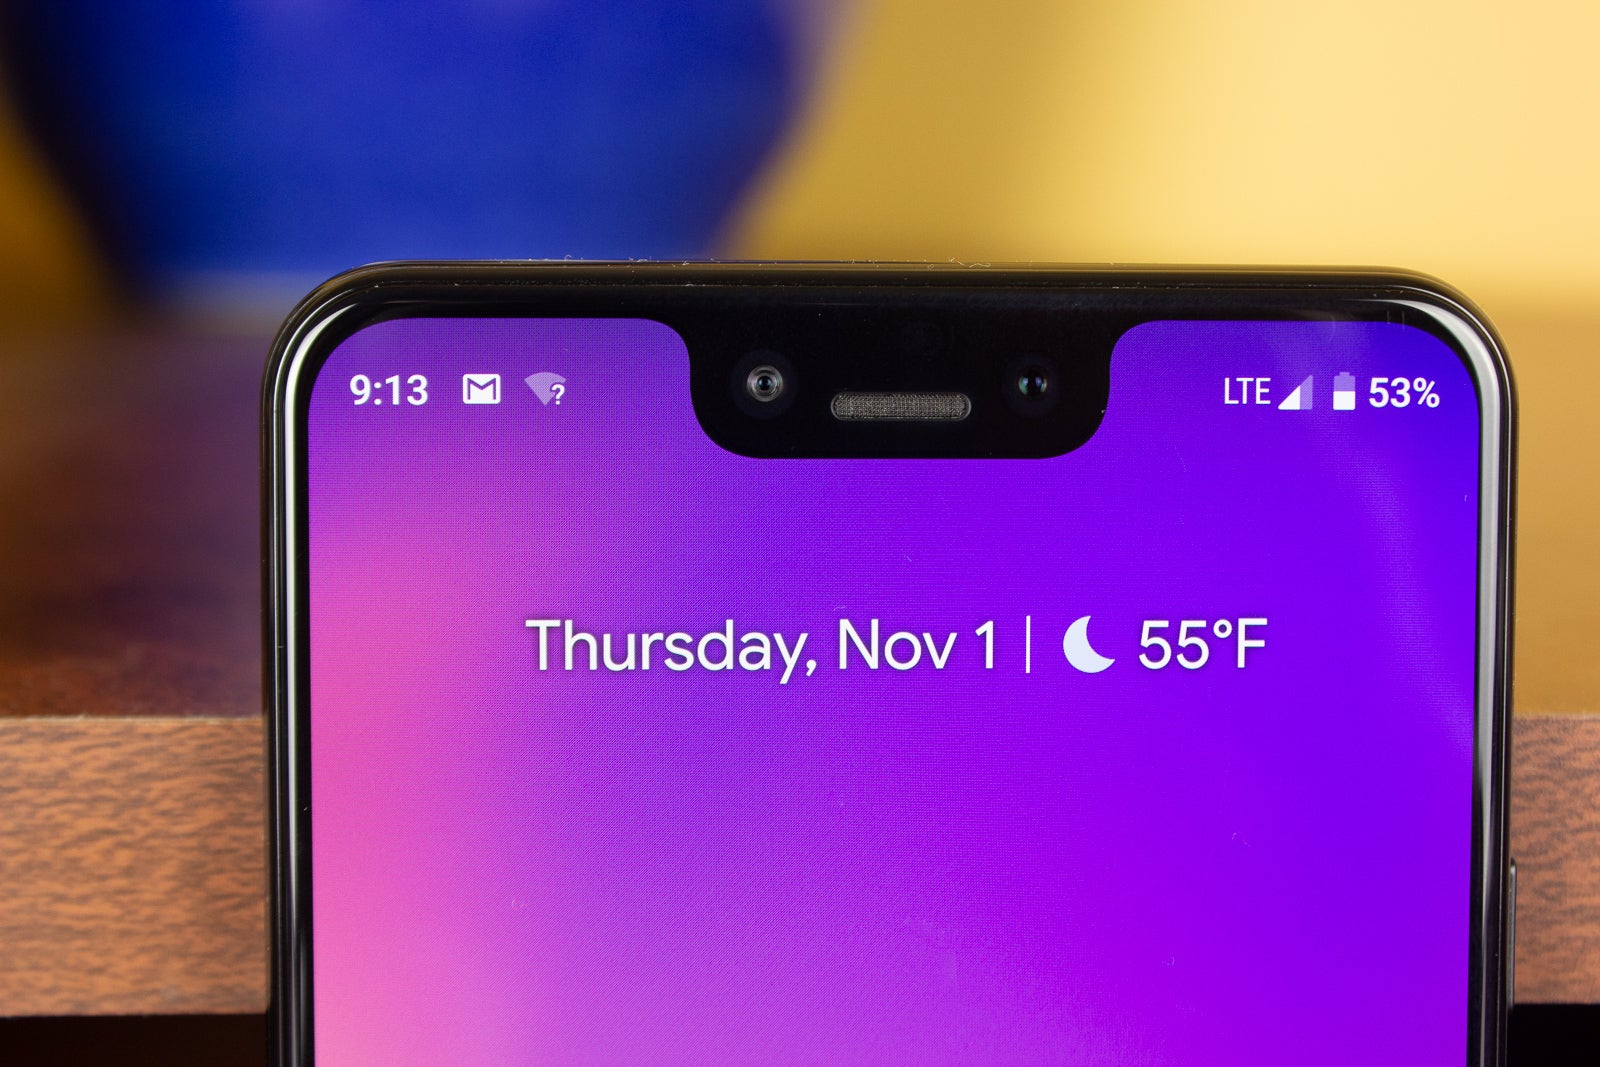 The Pixel 3 XL's giant notch looks as shocked as I was when I first saw it; I legit thought it was a meme at first, a fake phone design - While indecisive Google is playing catch-up with Apple, Samsung plows ahead (Pixel Fold, Pixel Watch, Pixel 6)